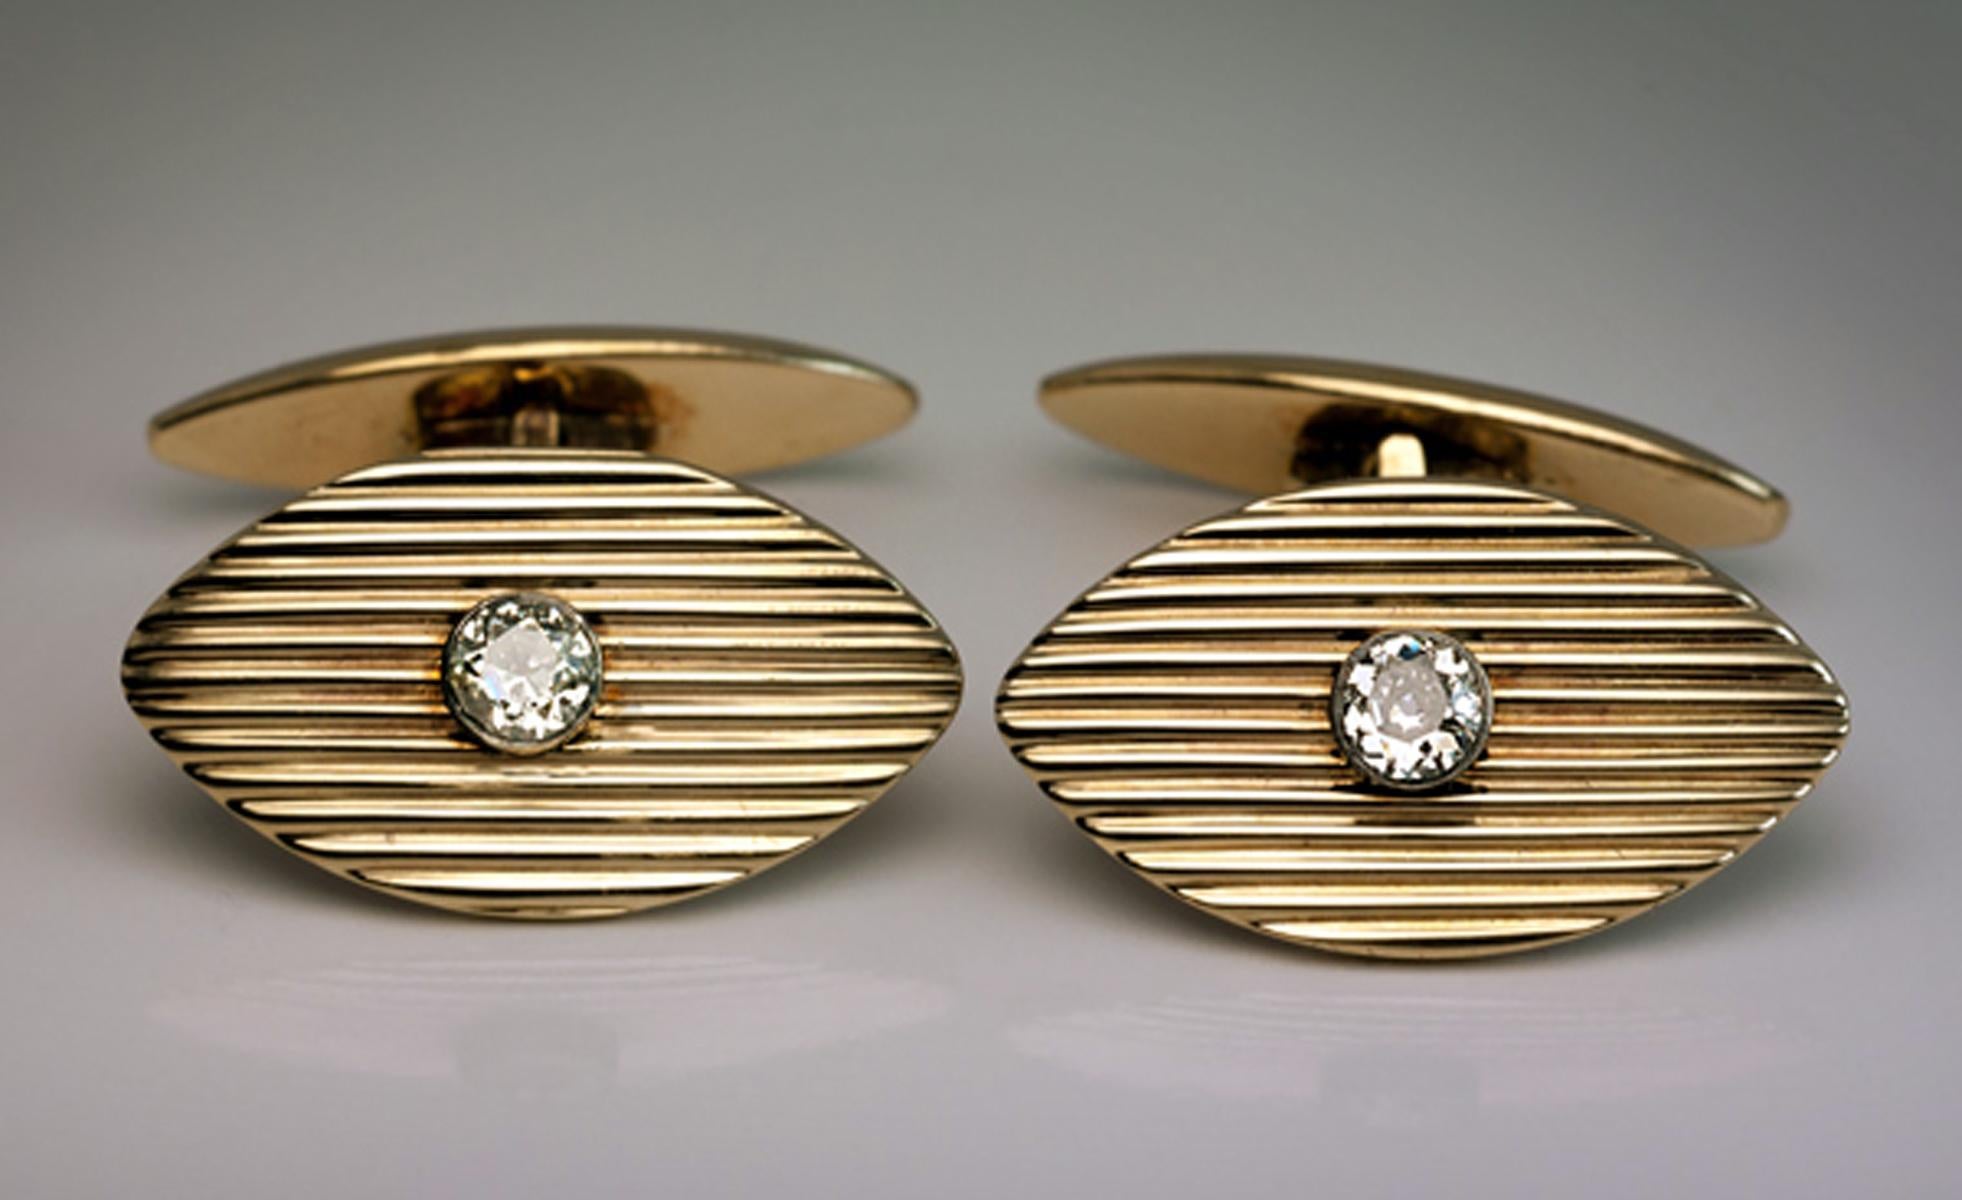 Marchak Antique Russian Diamond Gold Cufflinks In Excellent Condition For Sale In Chicago, IL